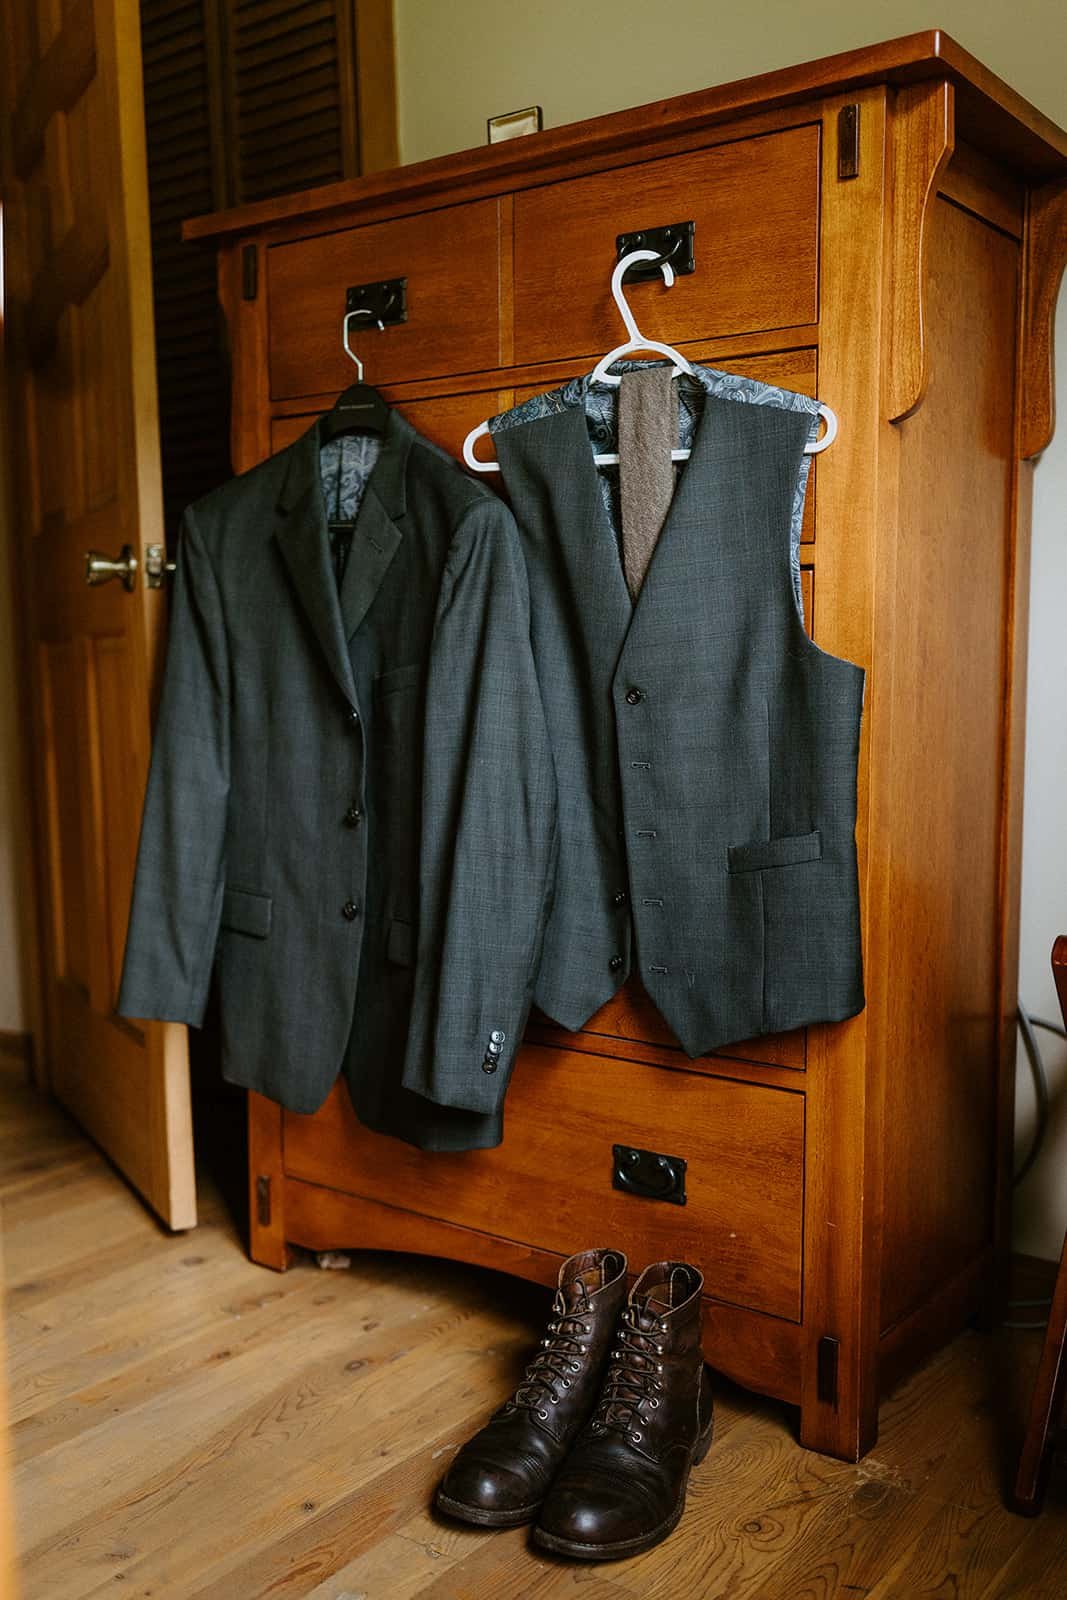 A suit and jacket hang on a wood dresser in front of Redwing boots